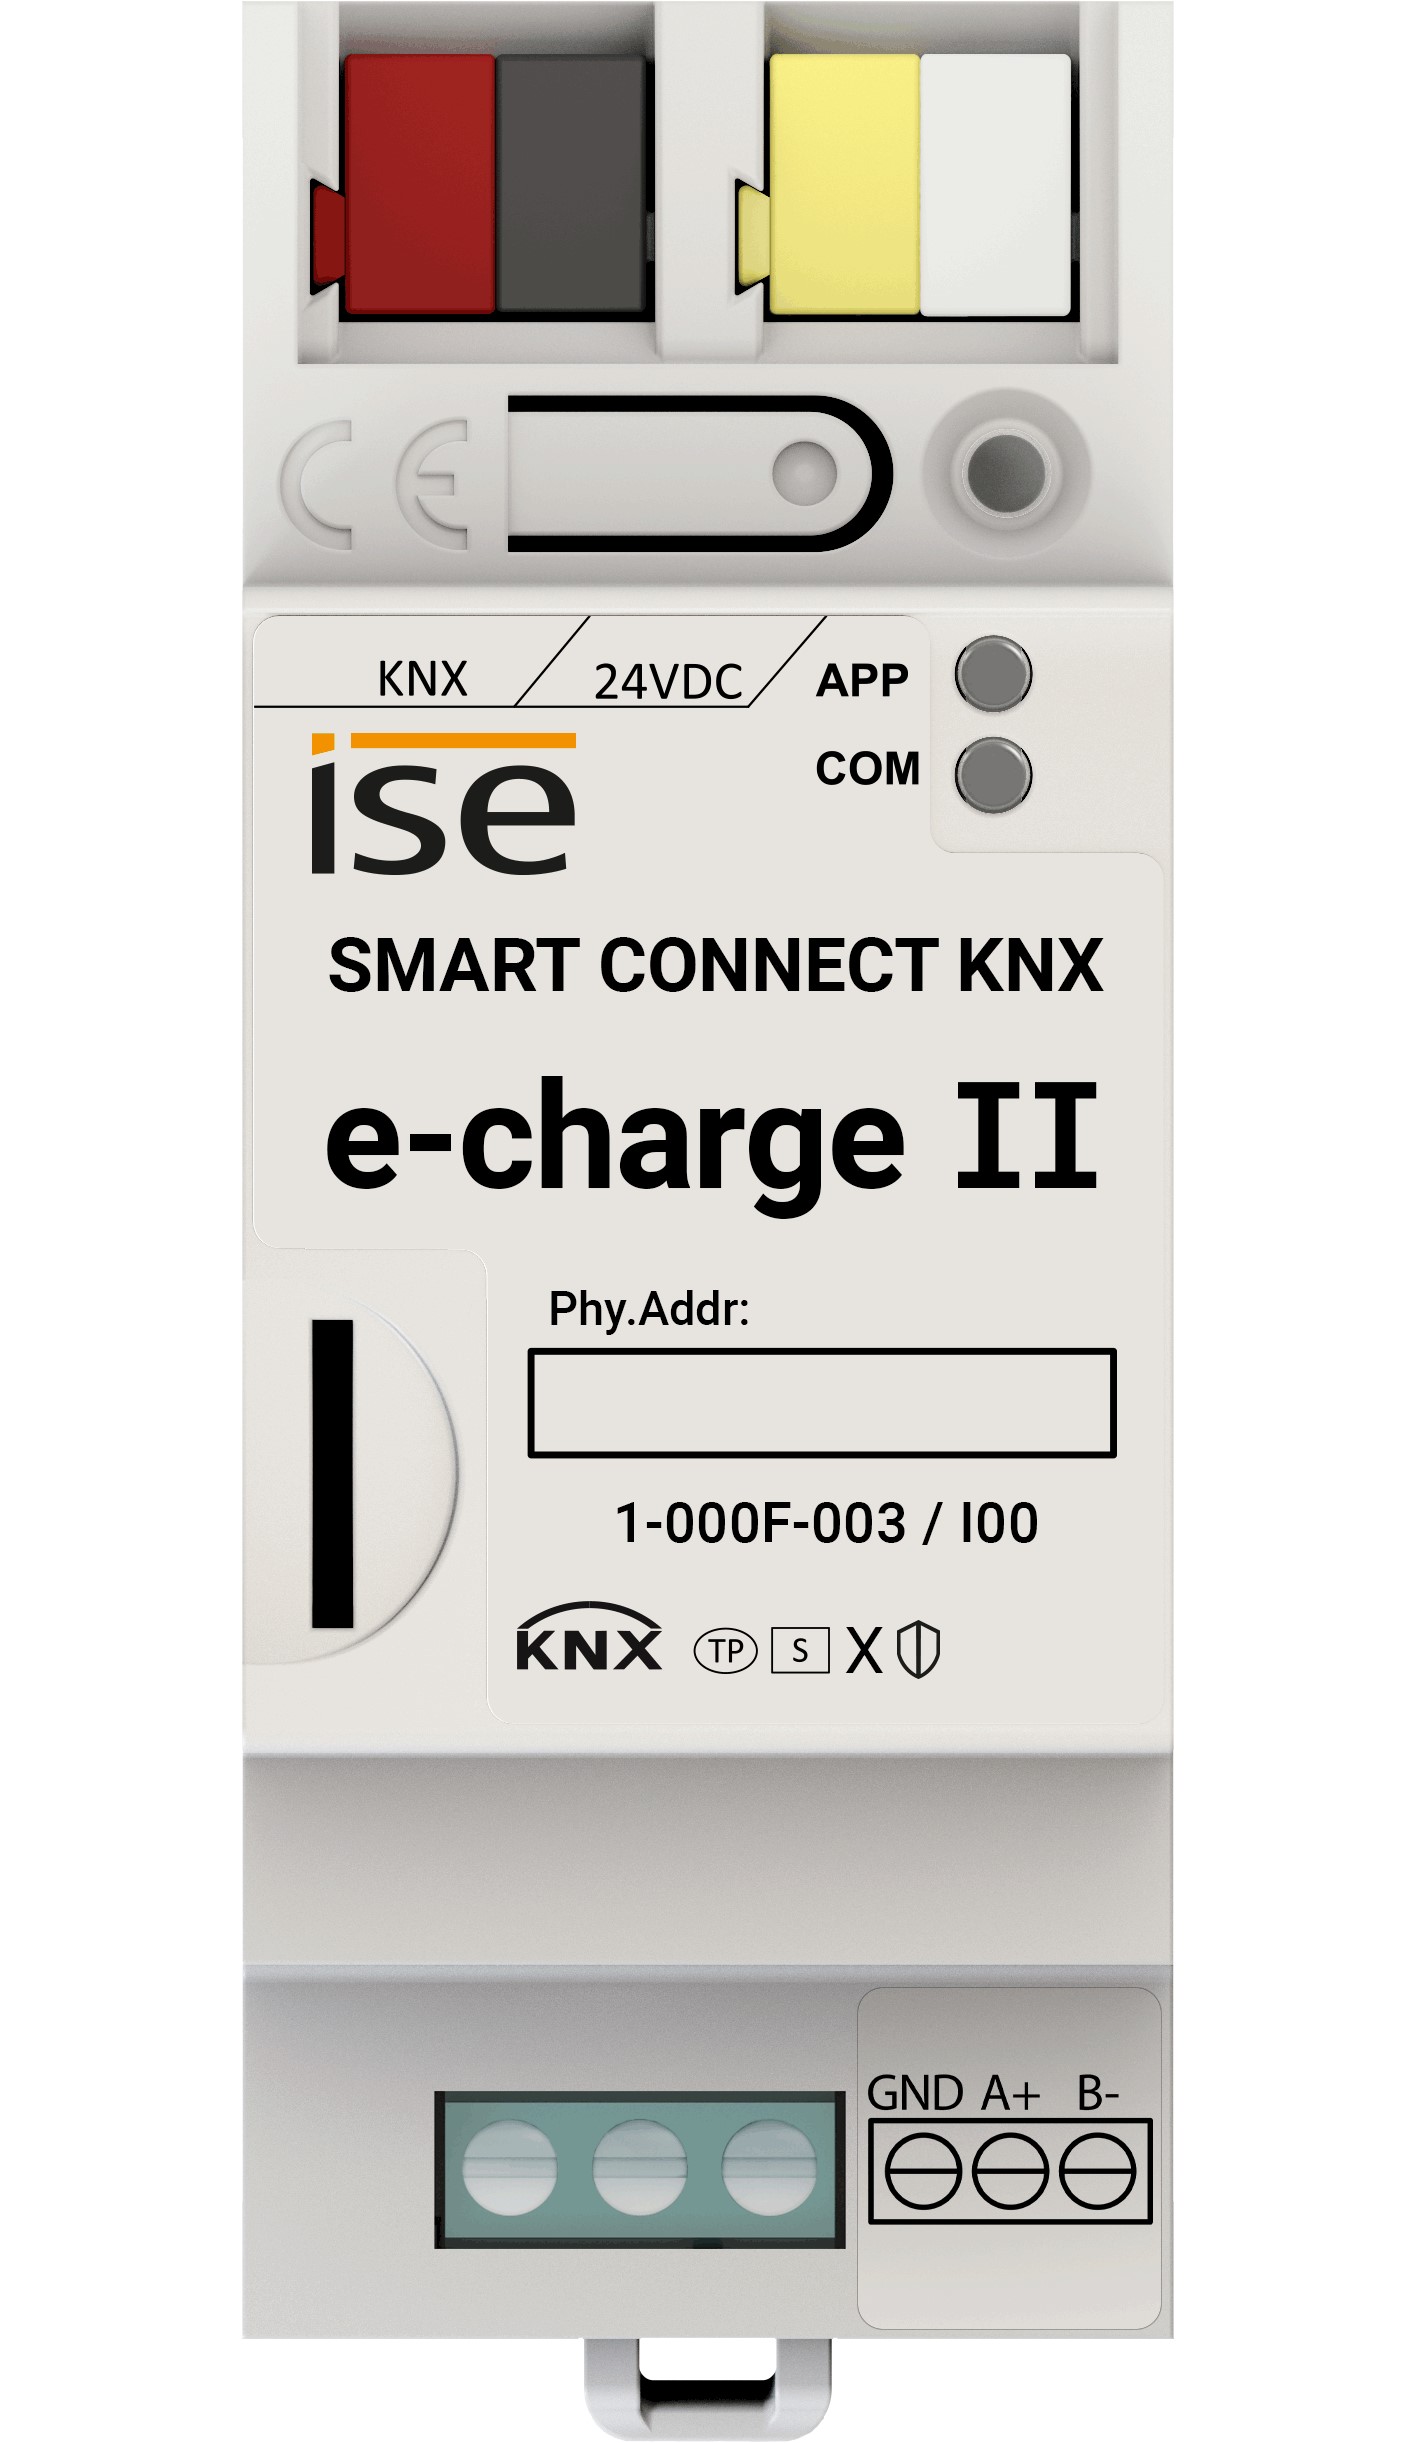 KNX SMART CONNECT e-charge II